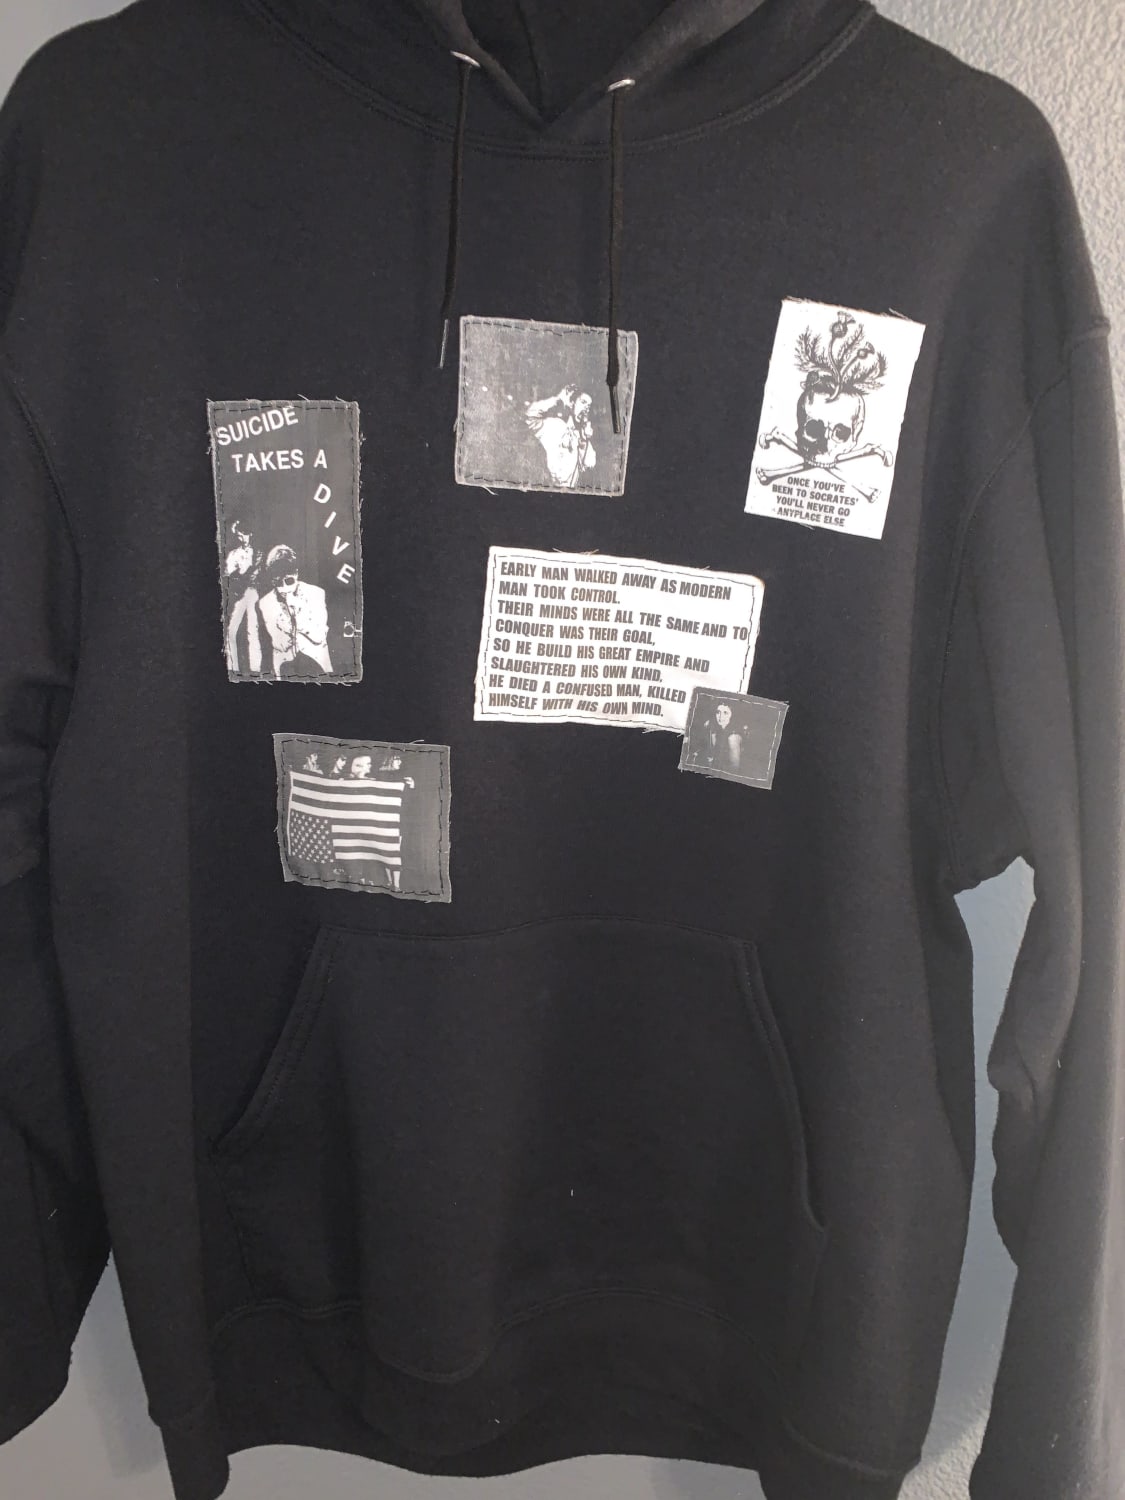 DIY hoodie i made with images i found in 80s Punk Zines. And bad religion lyrics